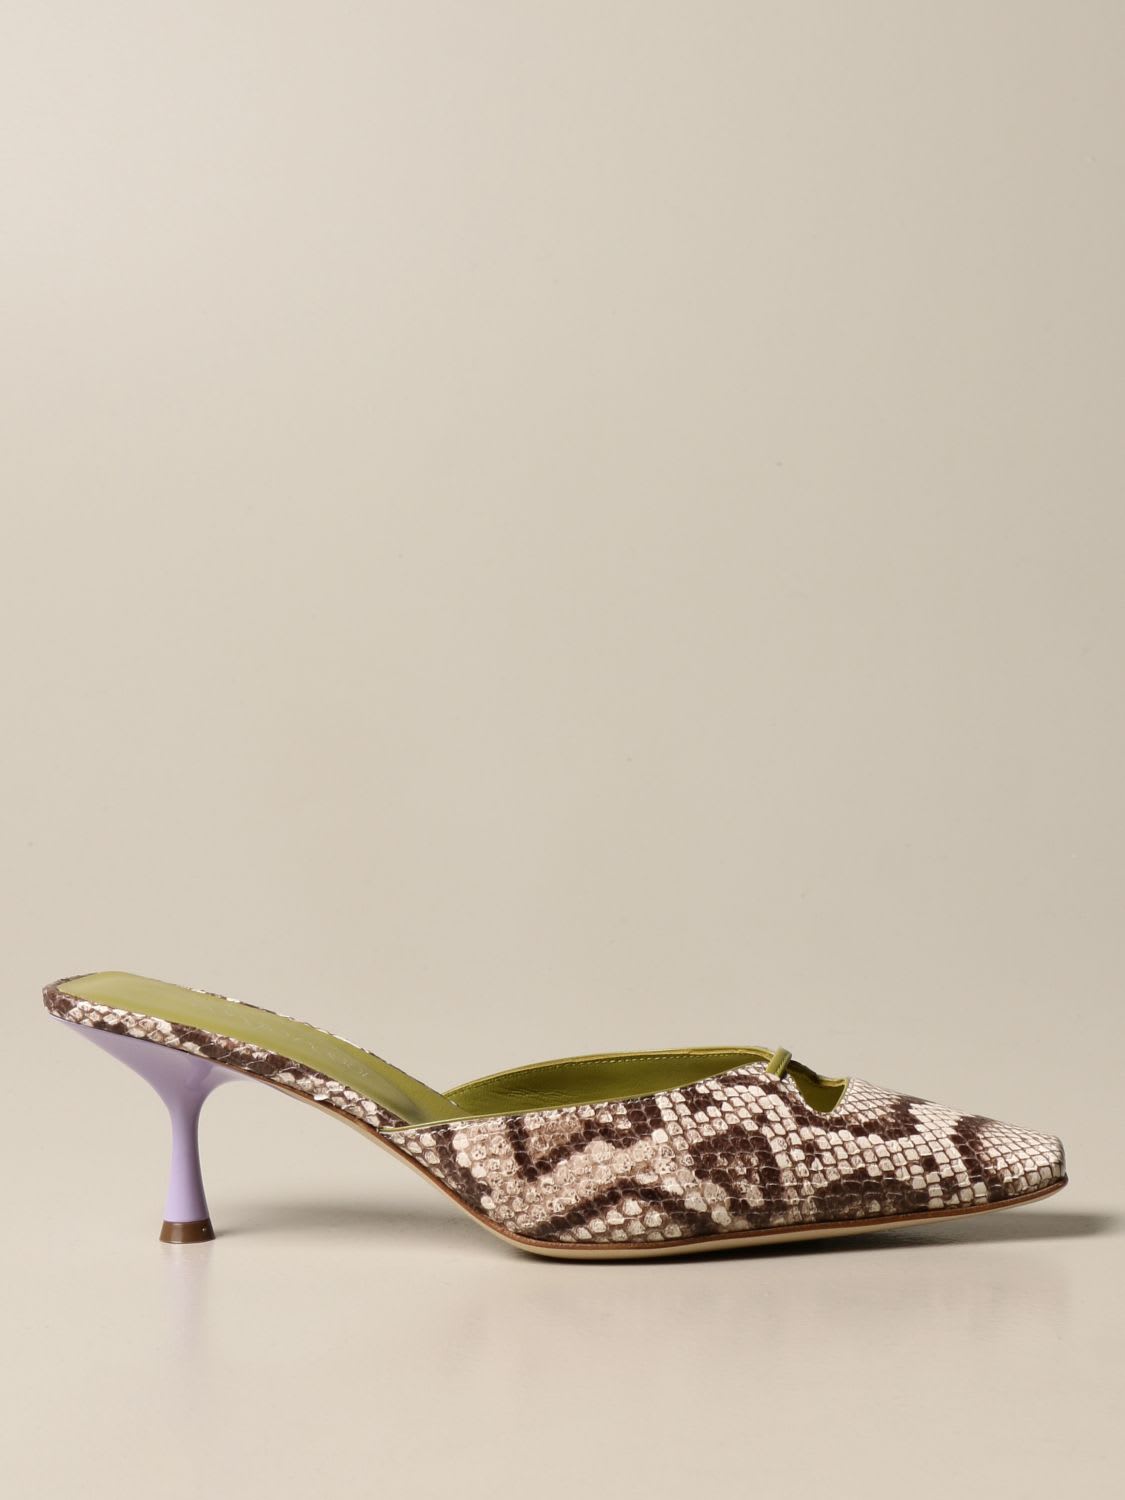 Photo of  Sergio Rossi Heeled Sandals Sergio Rossi Mules In Leather With Python Print- shop Sergio Rossi Sandals online sales